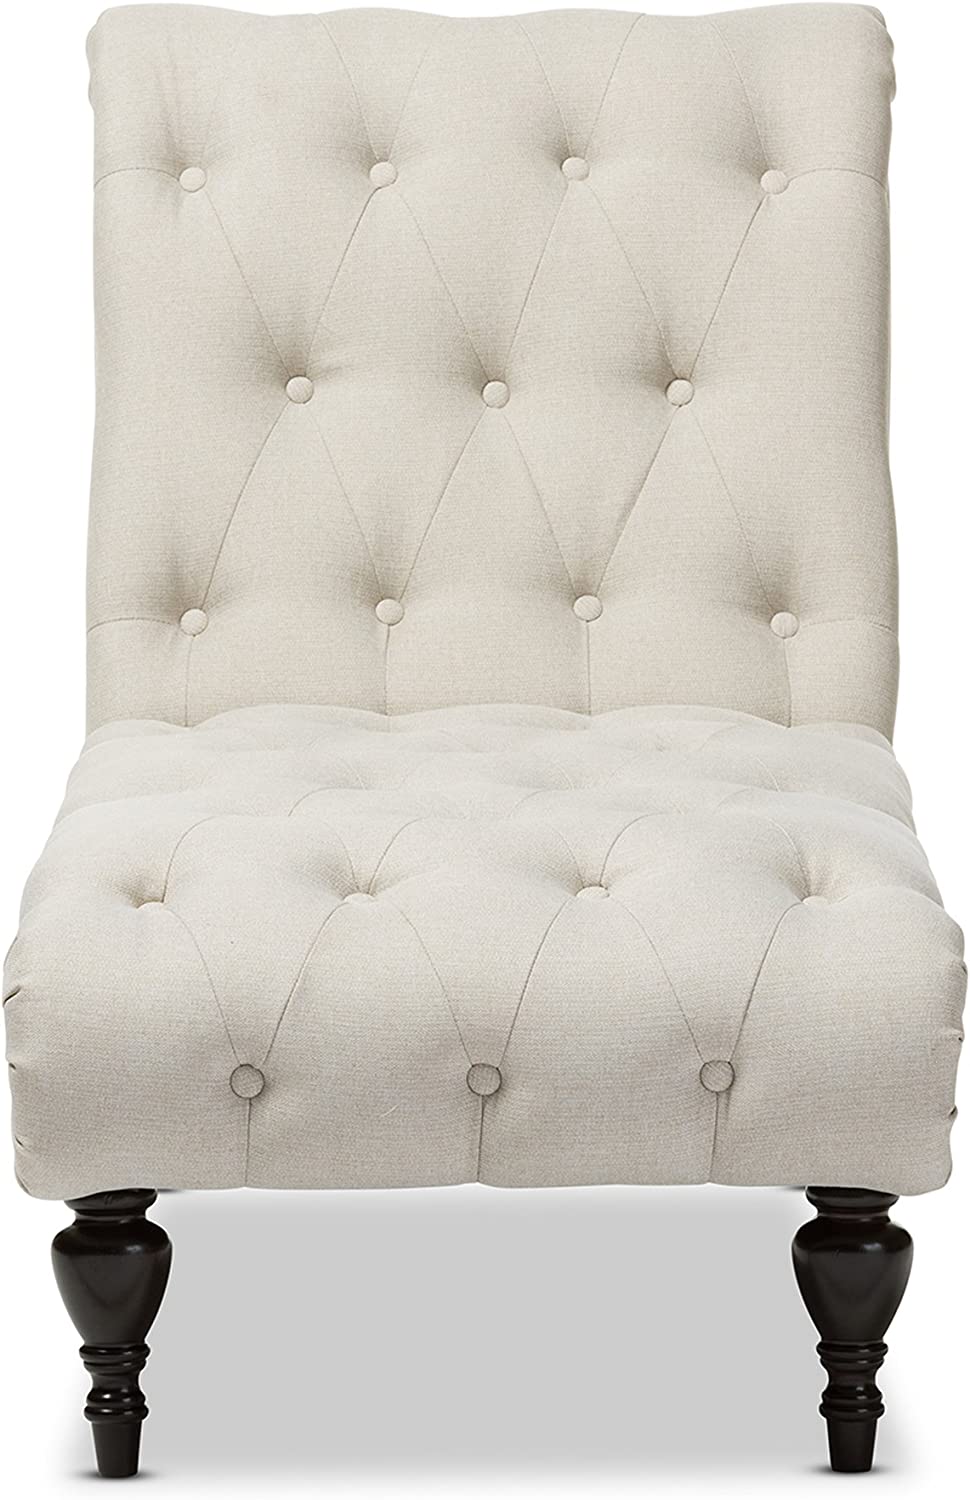 Baxton Studio Layla Mid-century Modern Light Beige Fabric Upholstered Button-tufted Chaise Lounge, cream